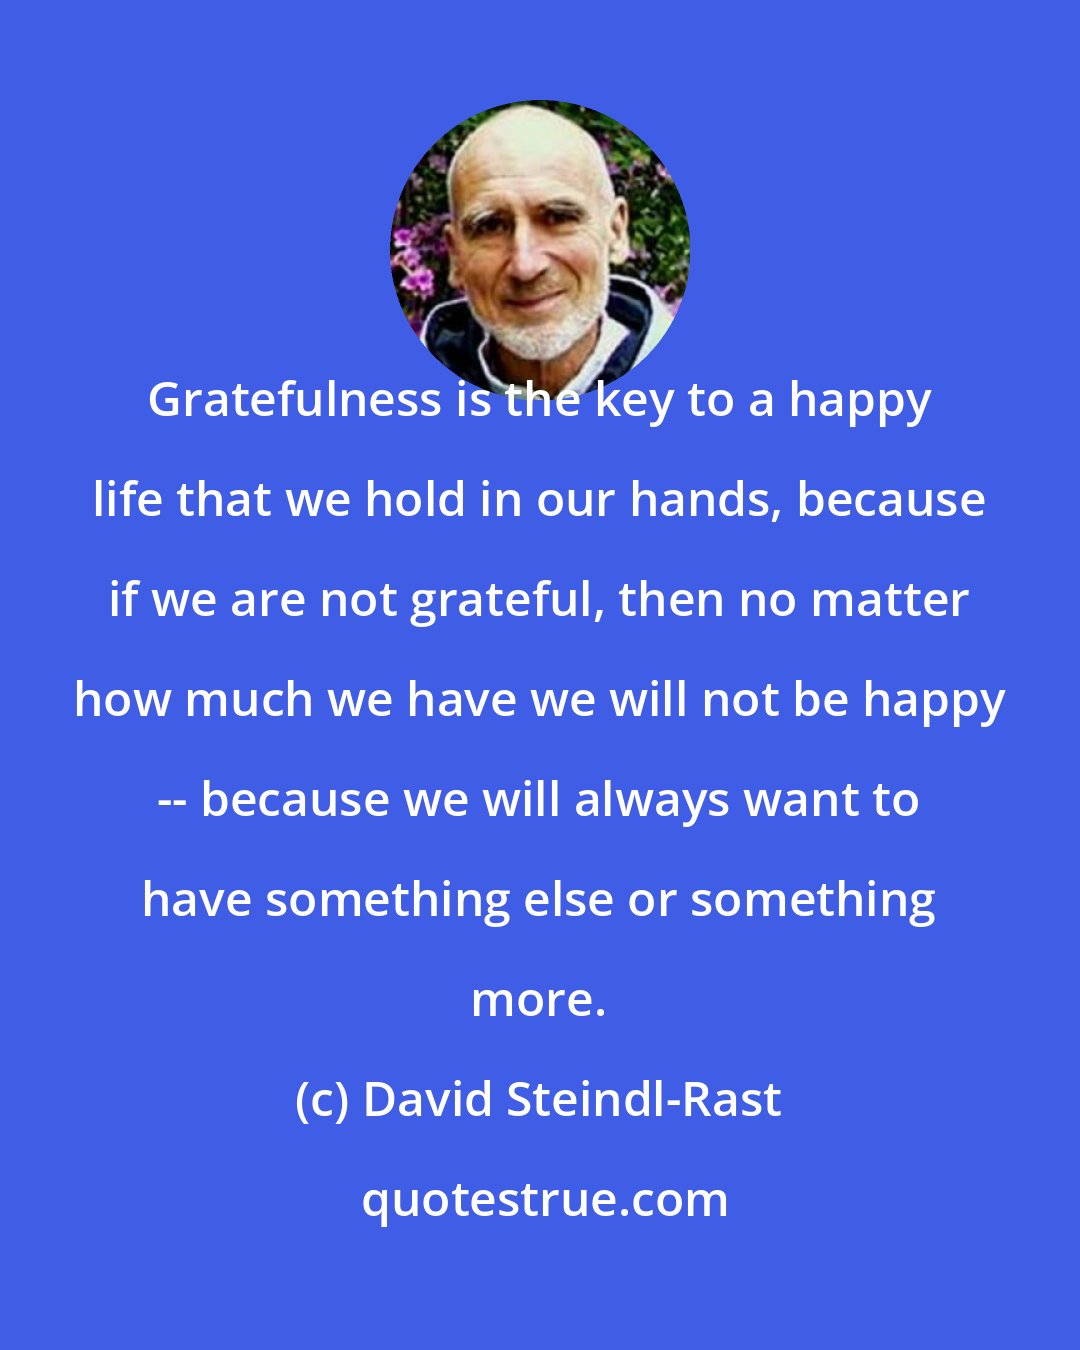 David Steindl-Rast: Gratefulness is the key to a happy life that we hold in our hands, because if we are not grateful, then no matter how much we have we will not be happy -- because we will always want to have something else or something more.